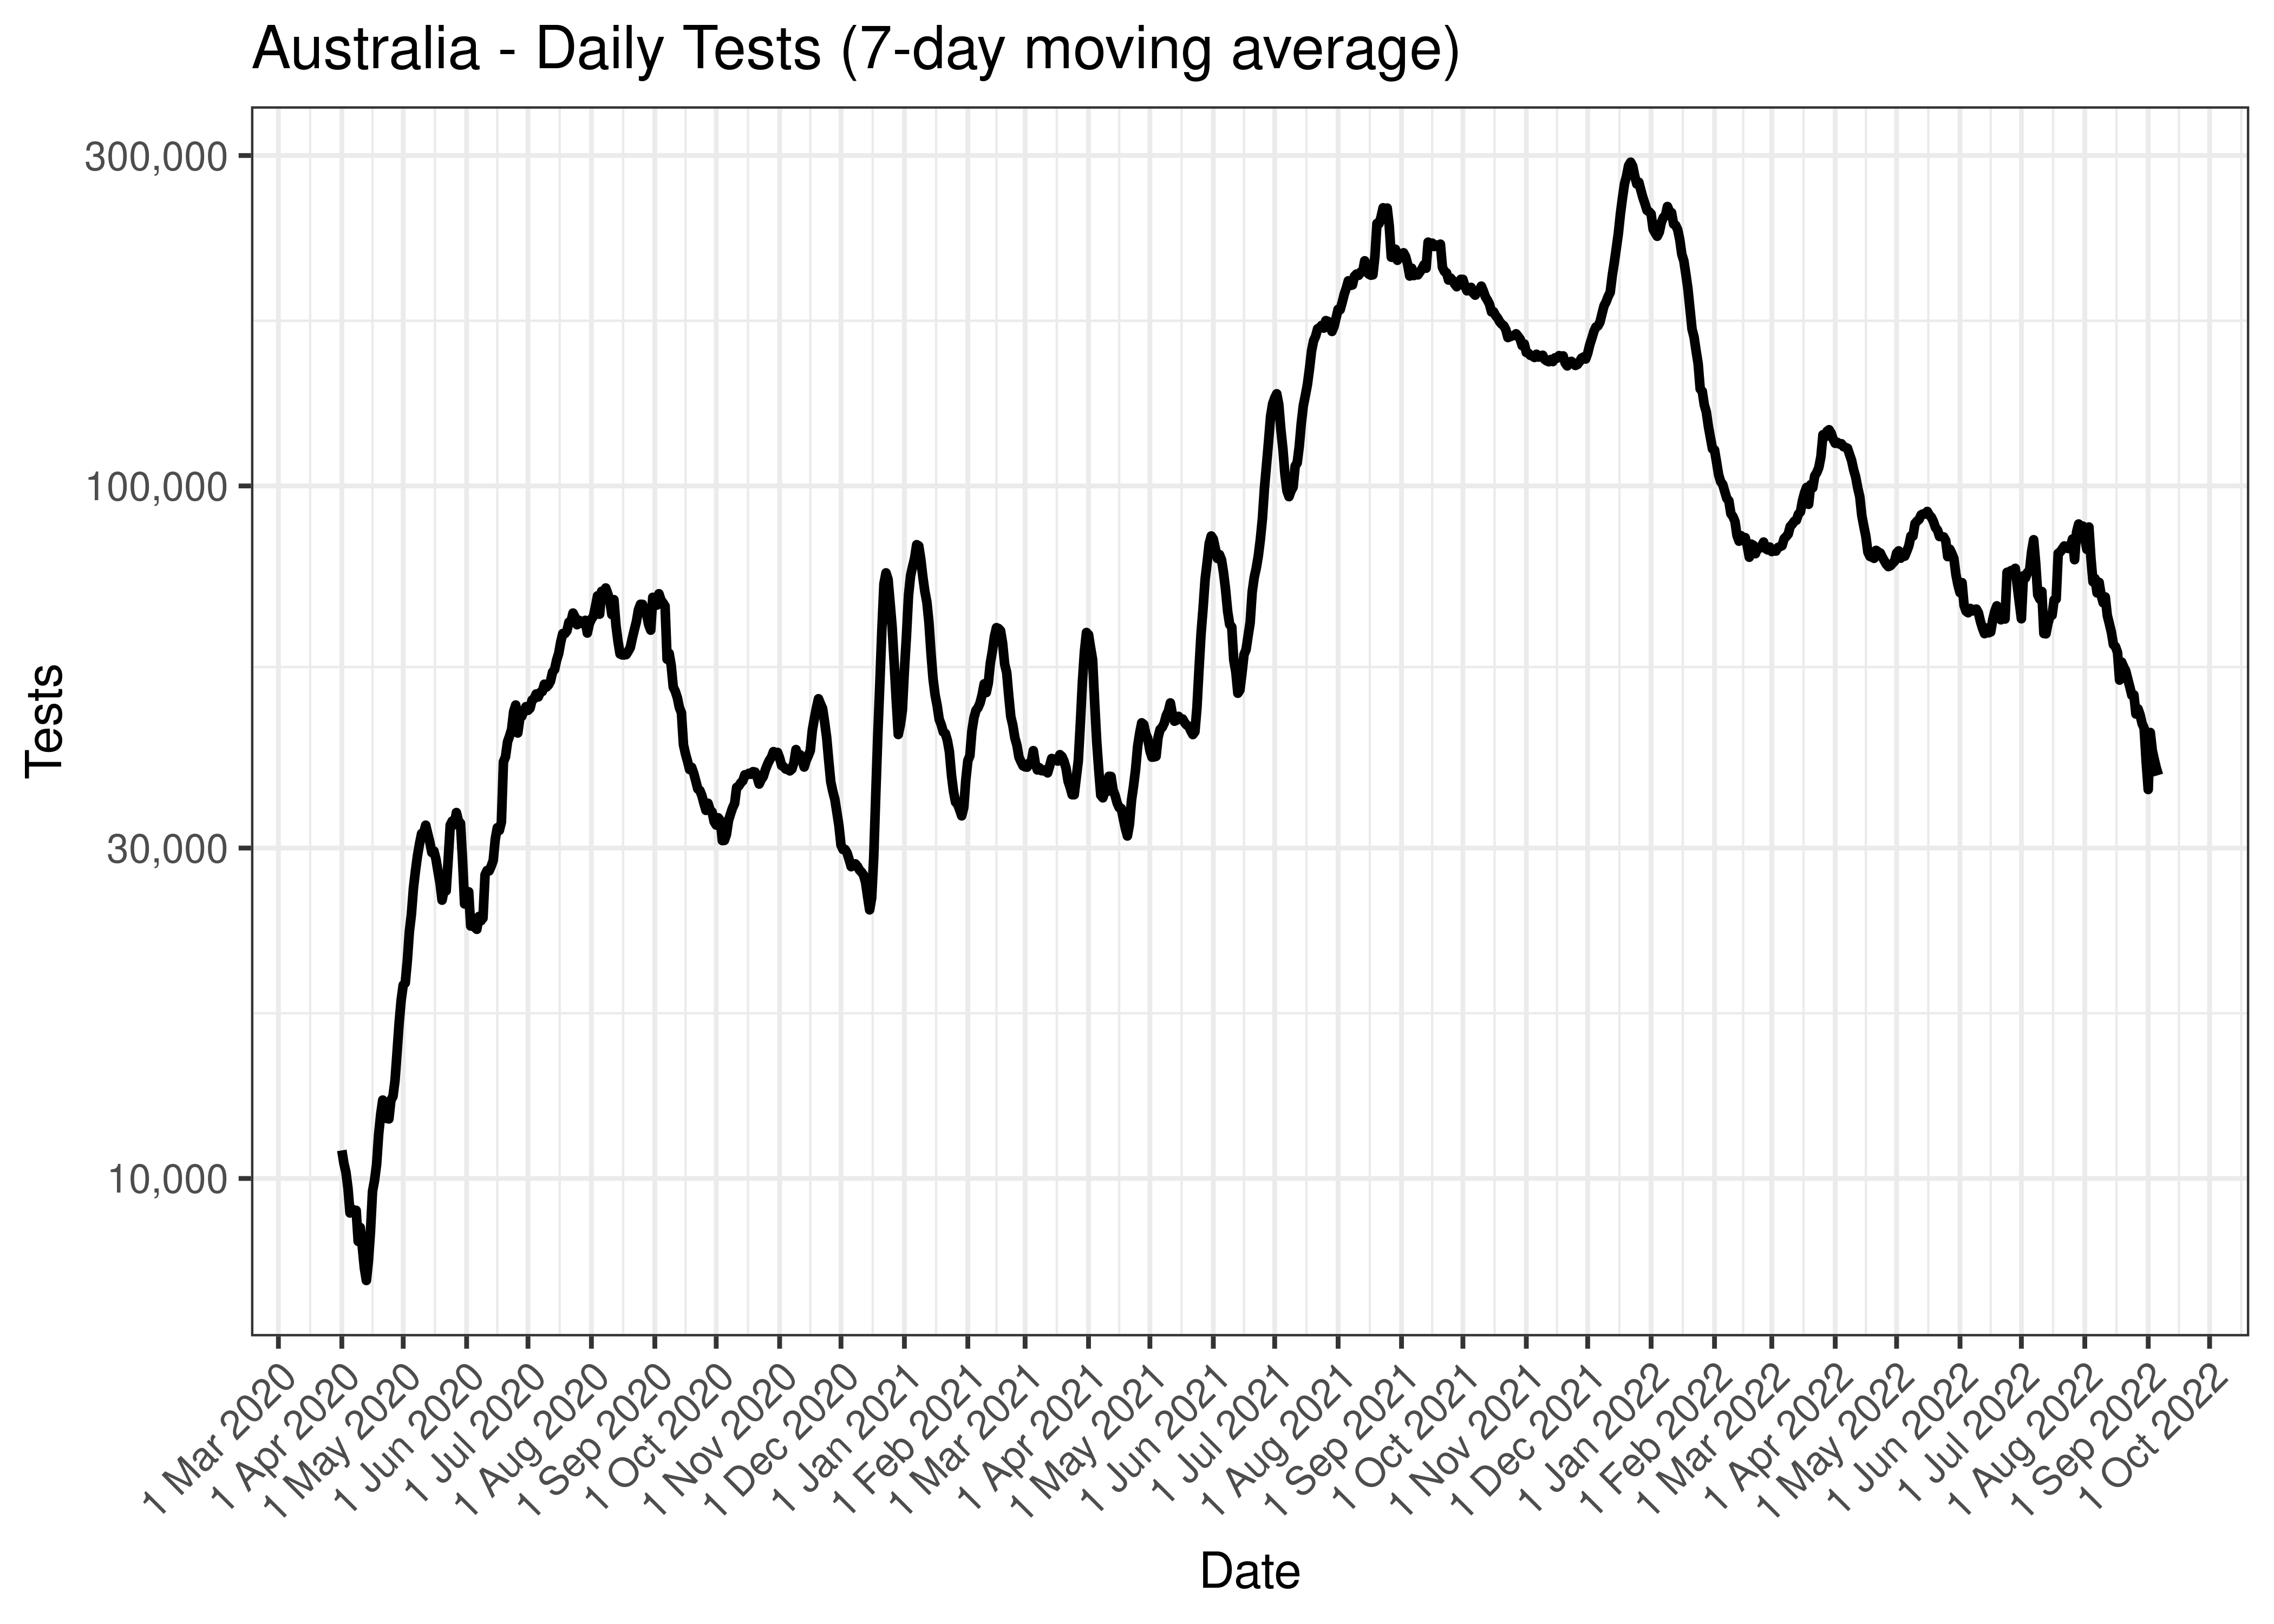 Australia - Daily Tests (7-day moving average)